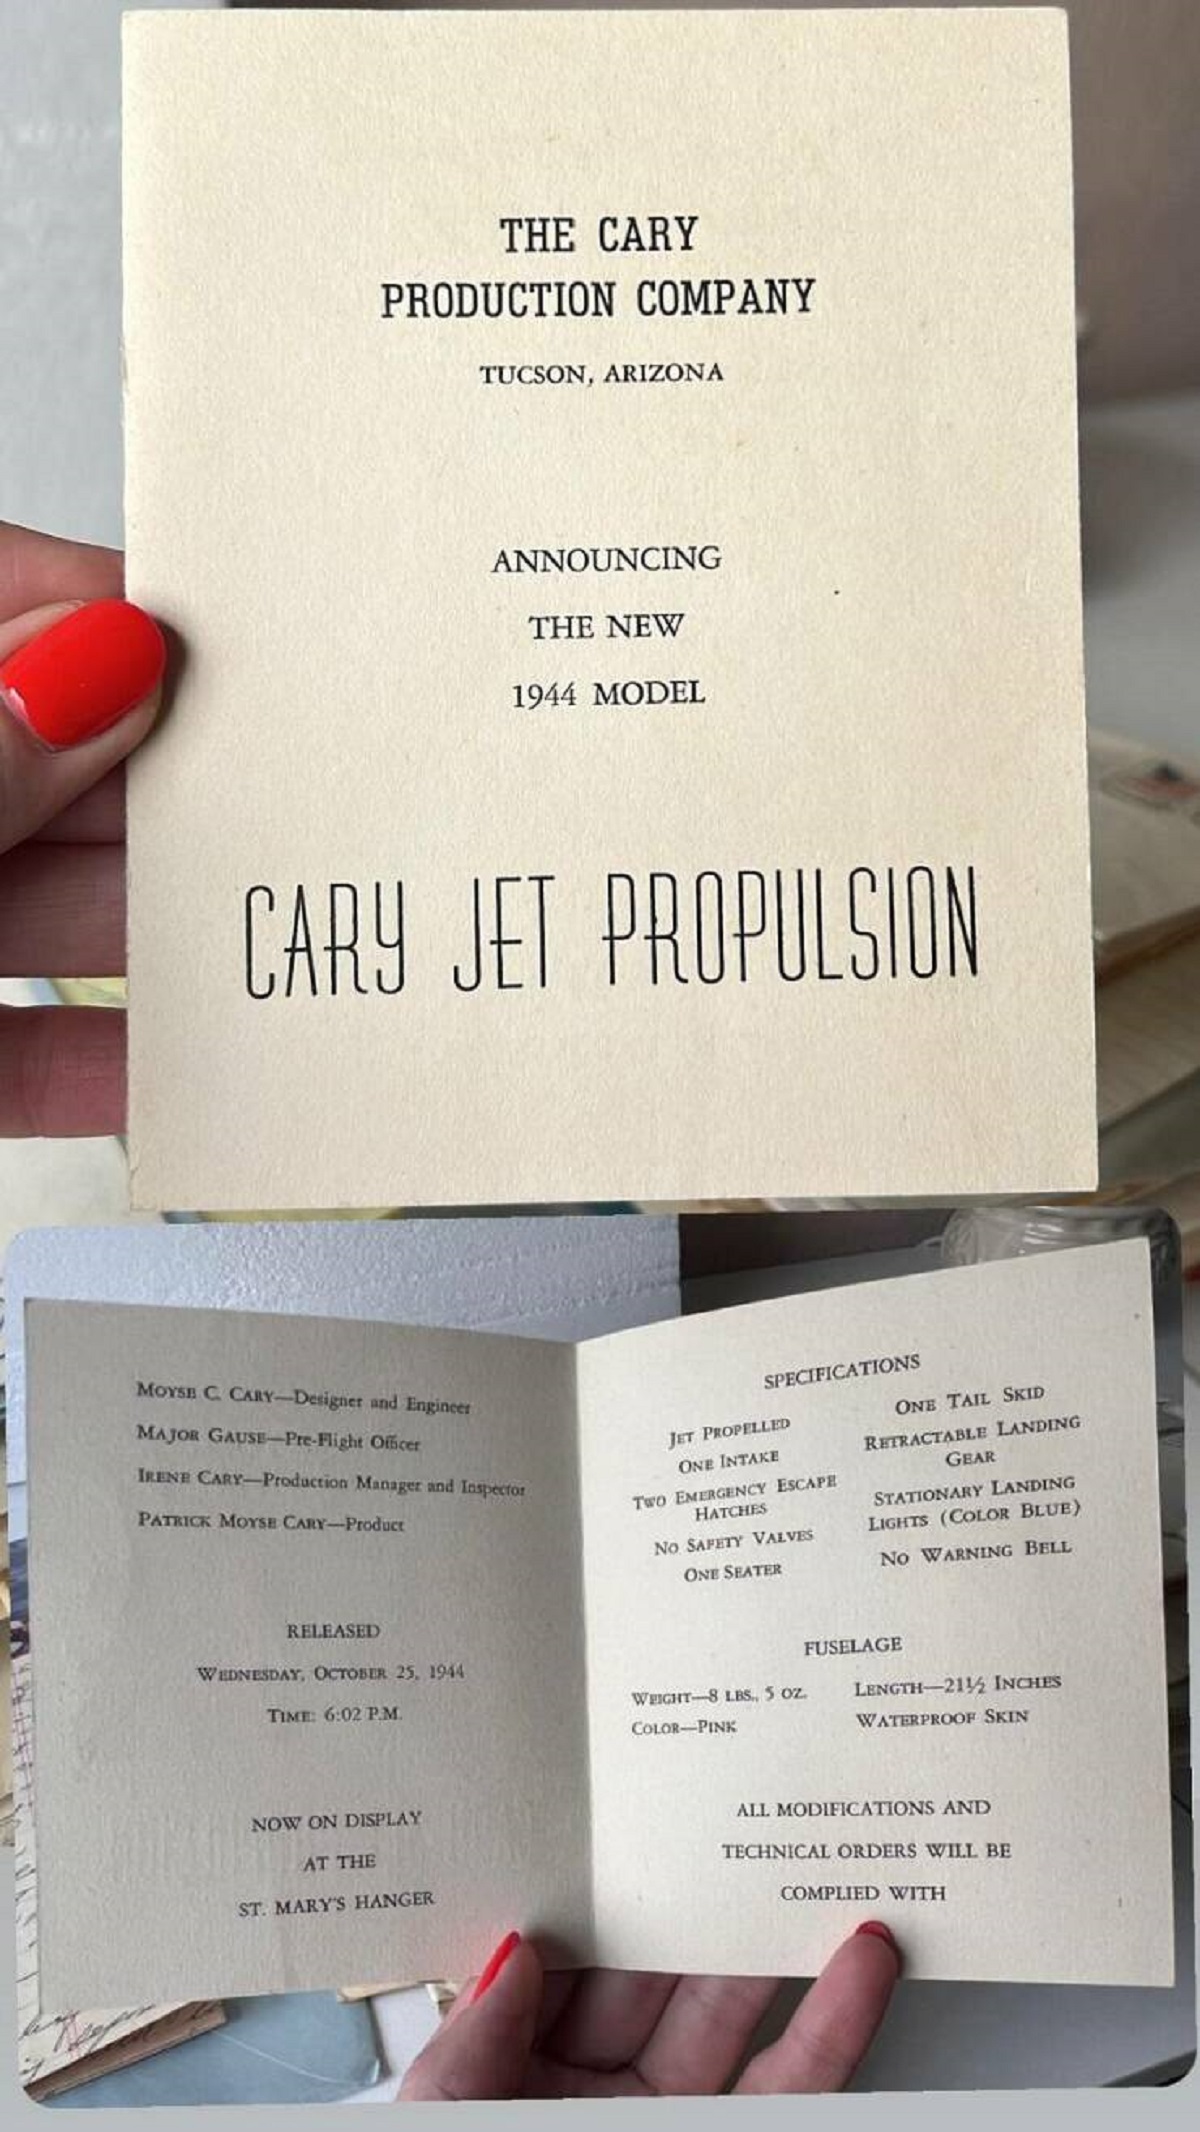 document - The Cary Production Company Tucson, Arizona Announcing The New 1944 Model Cary Jet Propulsion At Th Tal Tel Allocations And